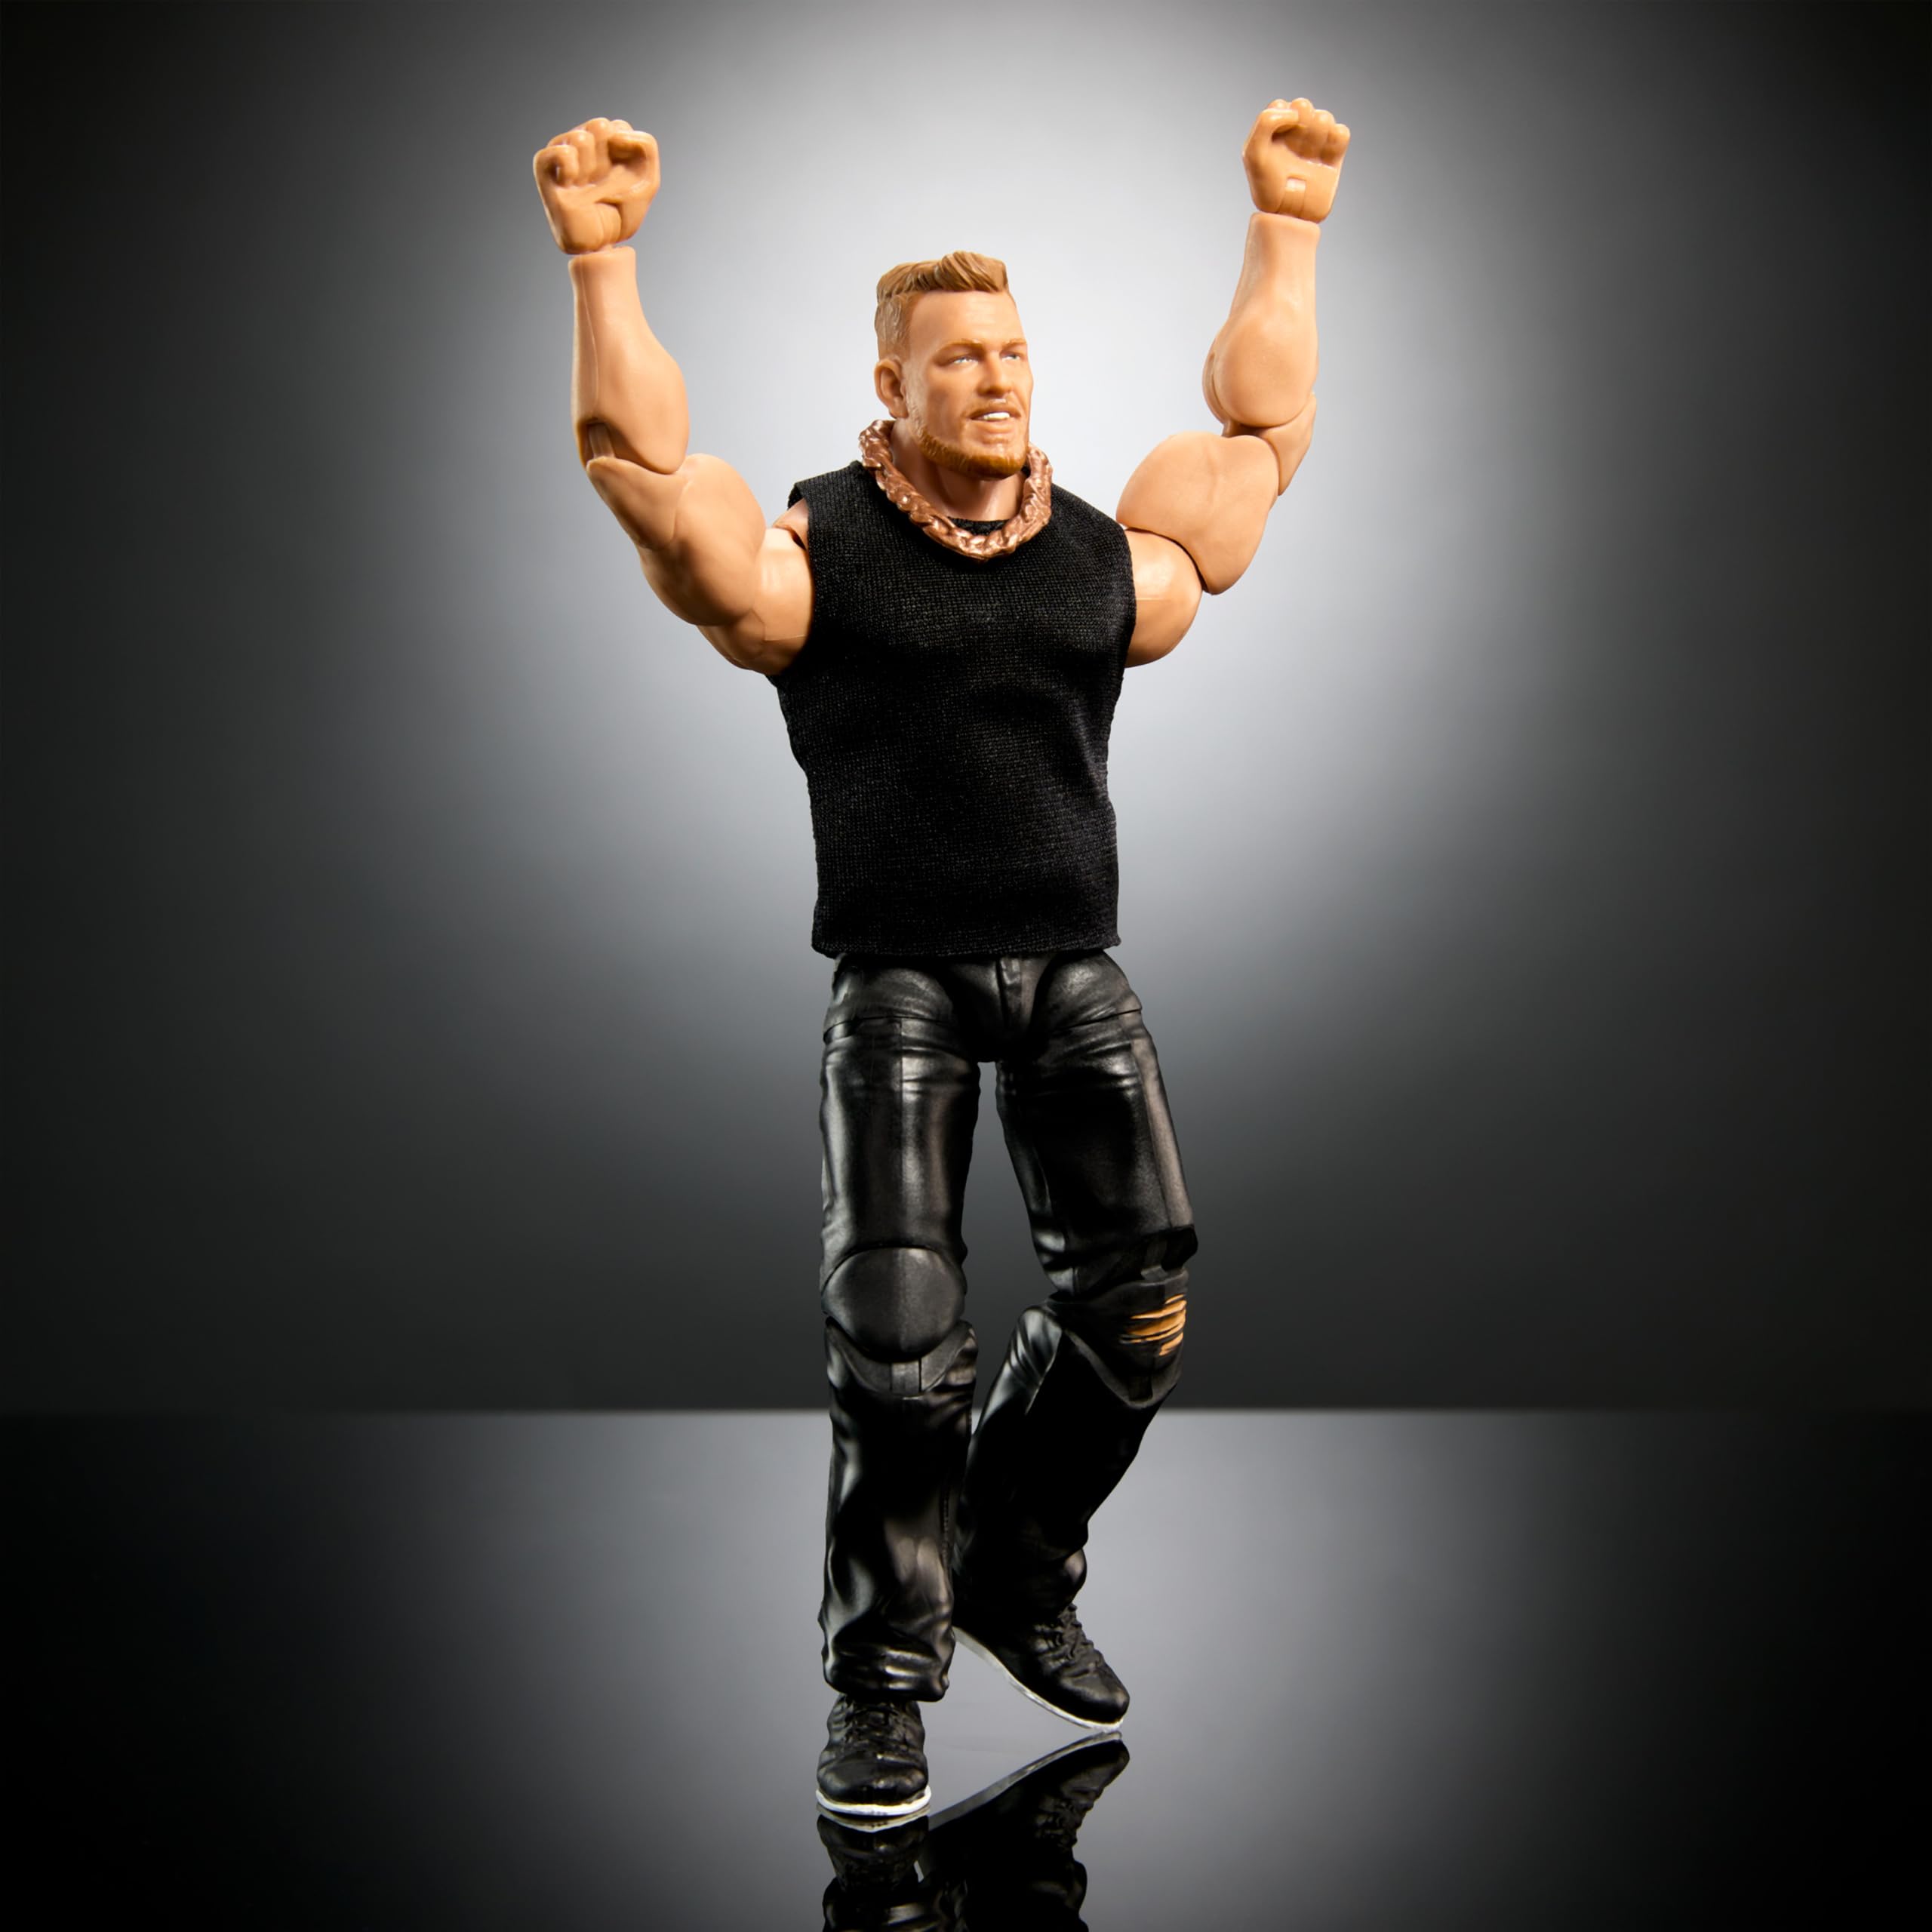 Mattel WWE Elite Action Figure Wrestlemania with Accessory and Nicholas Build-A-Figure Parts, Posable Collectible WWE Fans